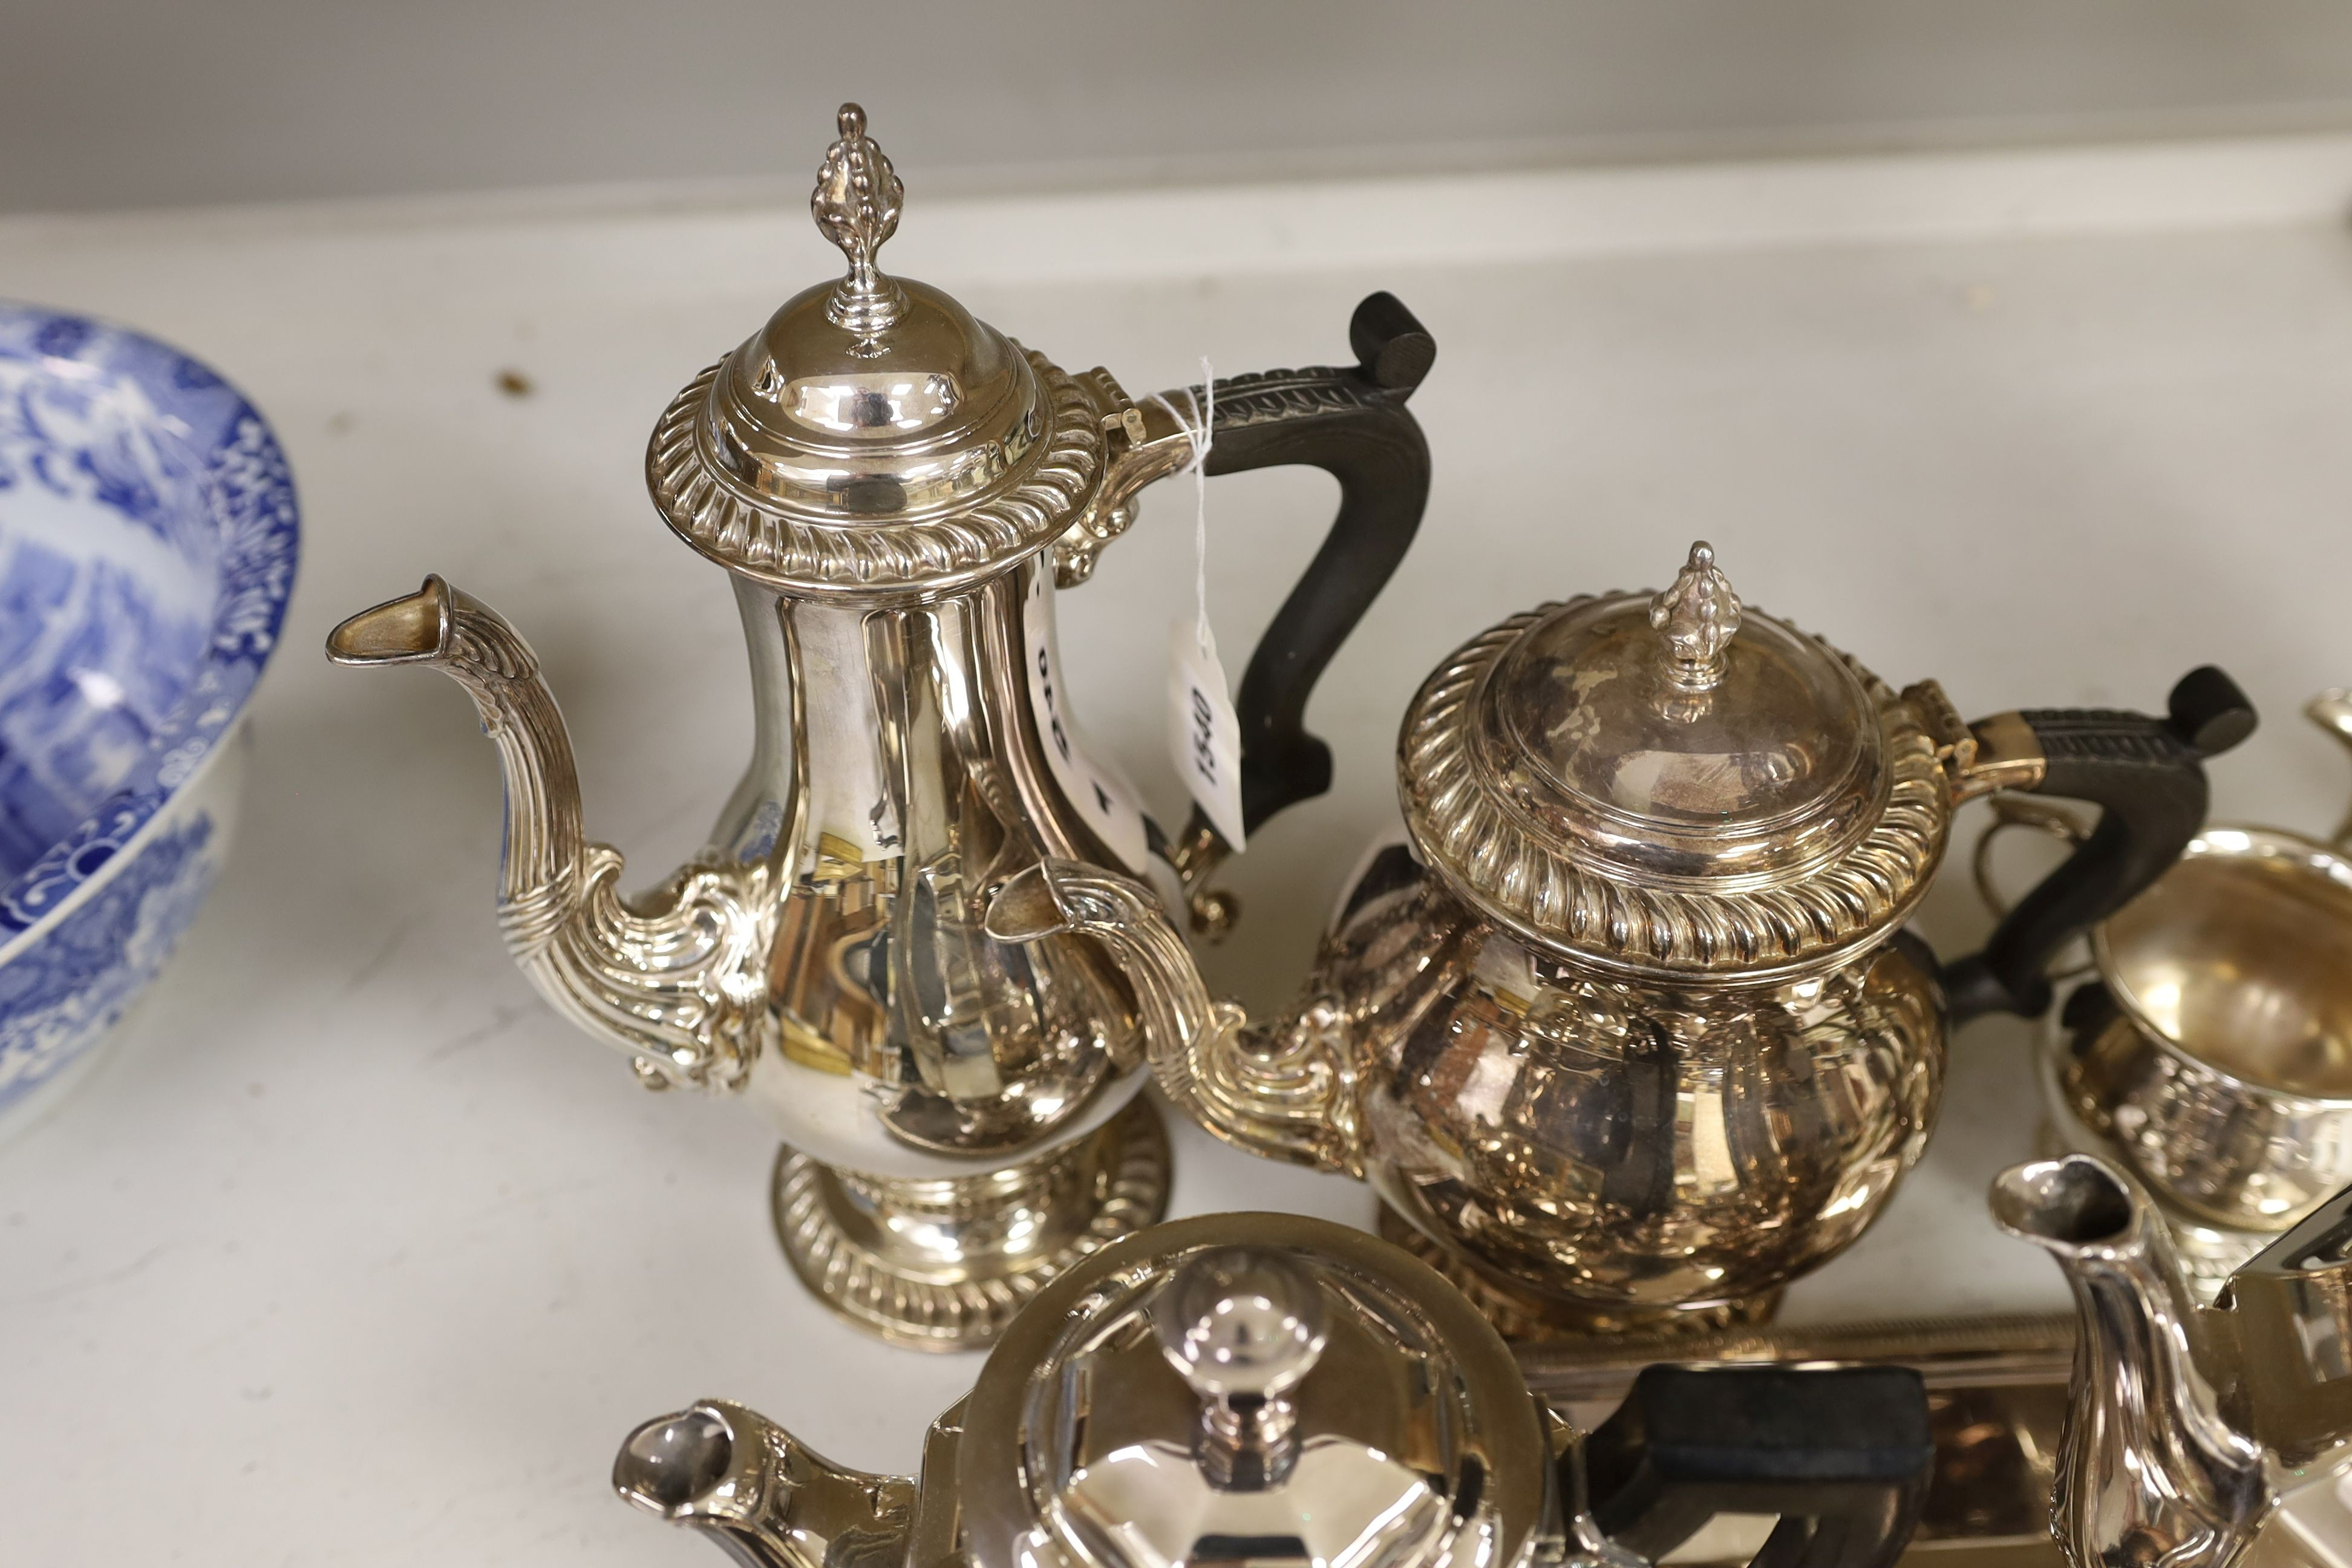 A French plated Cristofle tea set, together with other plated tea wares and a candelabrum - Image 7 of 7